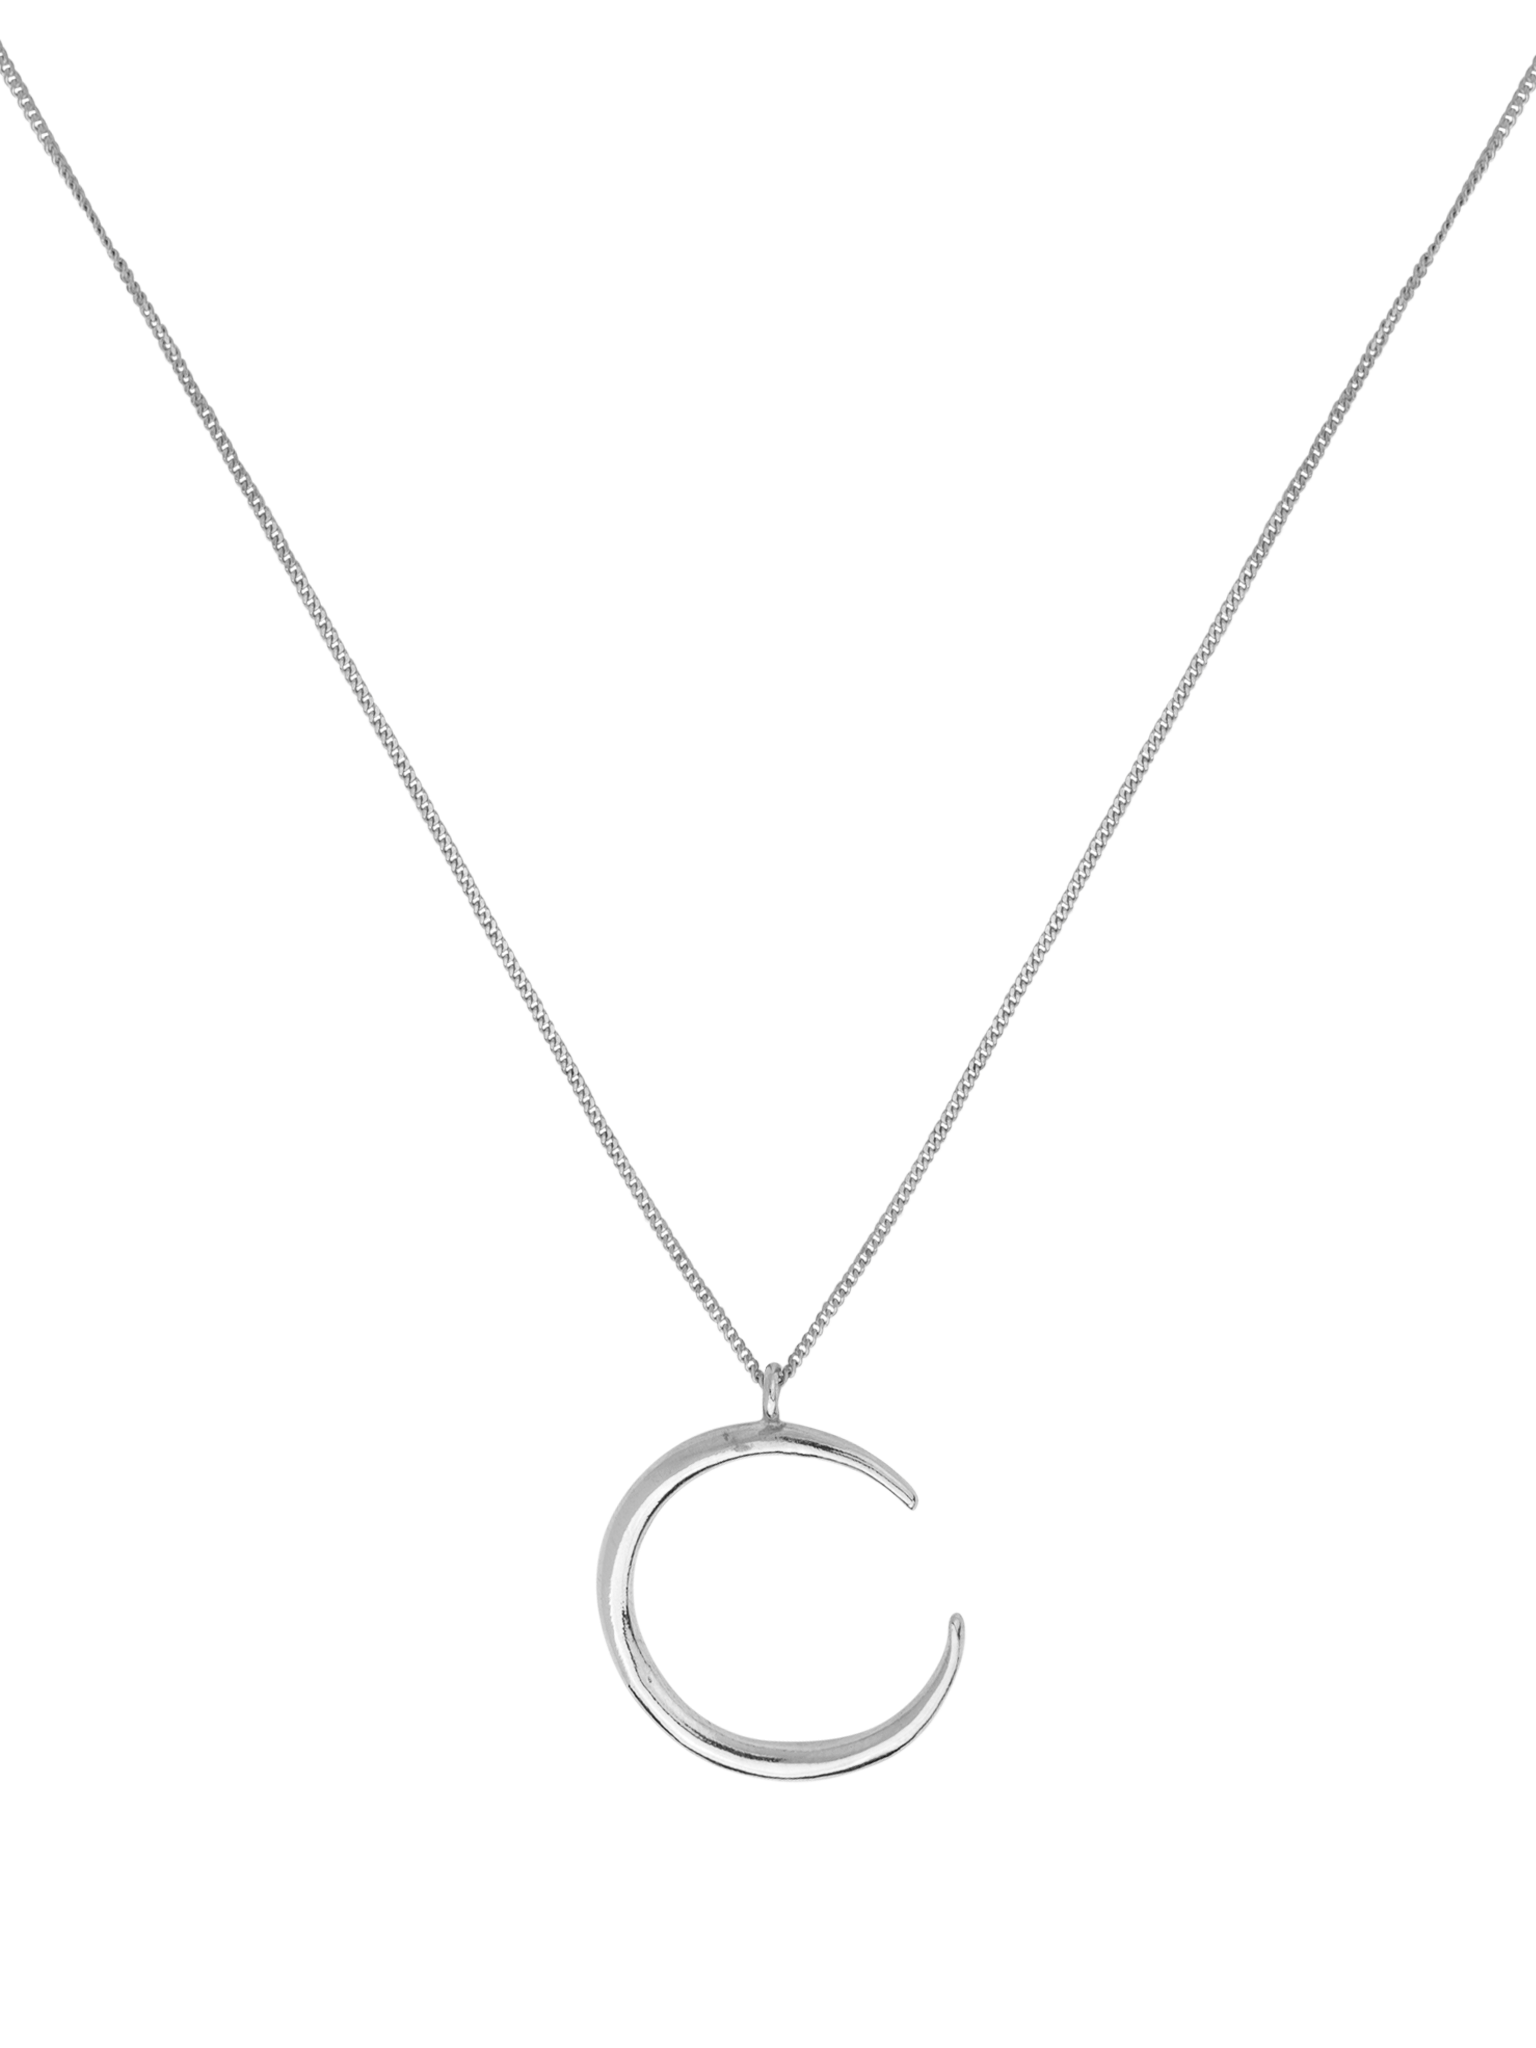 Crescent shaped pendant in sterling silver